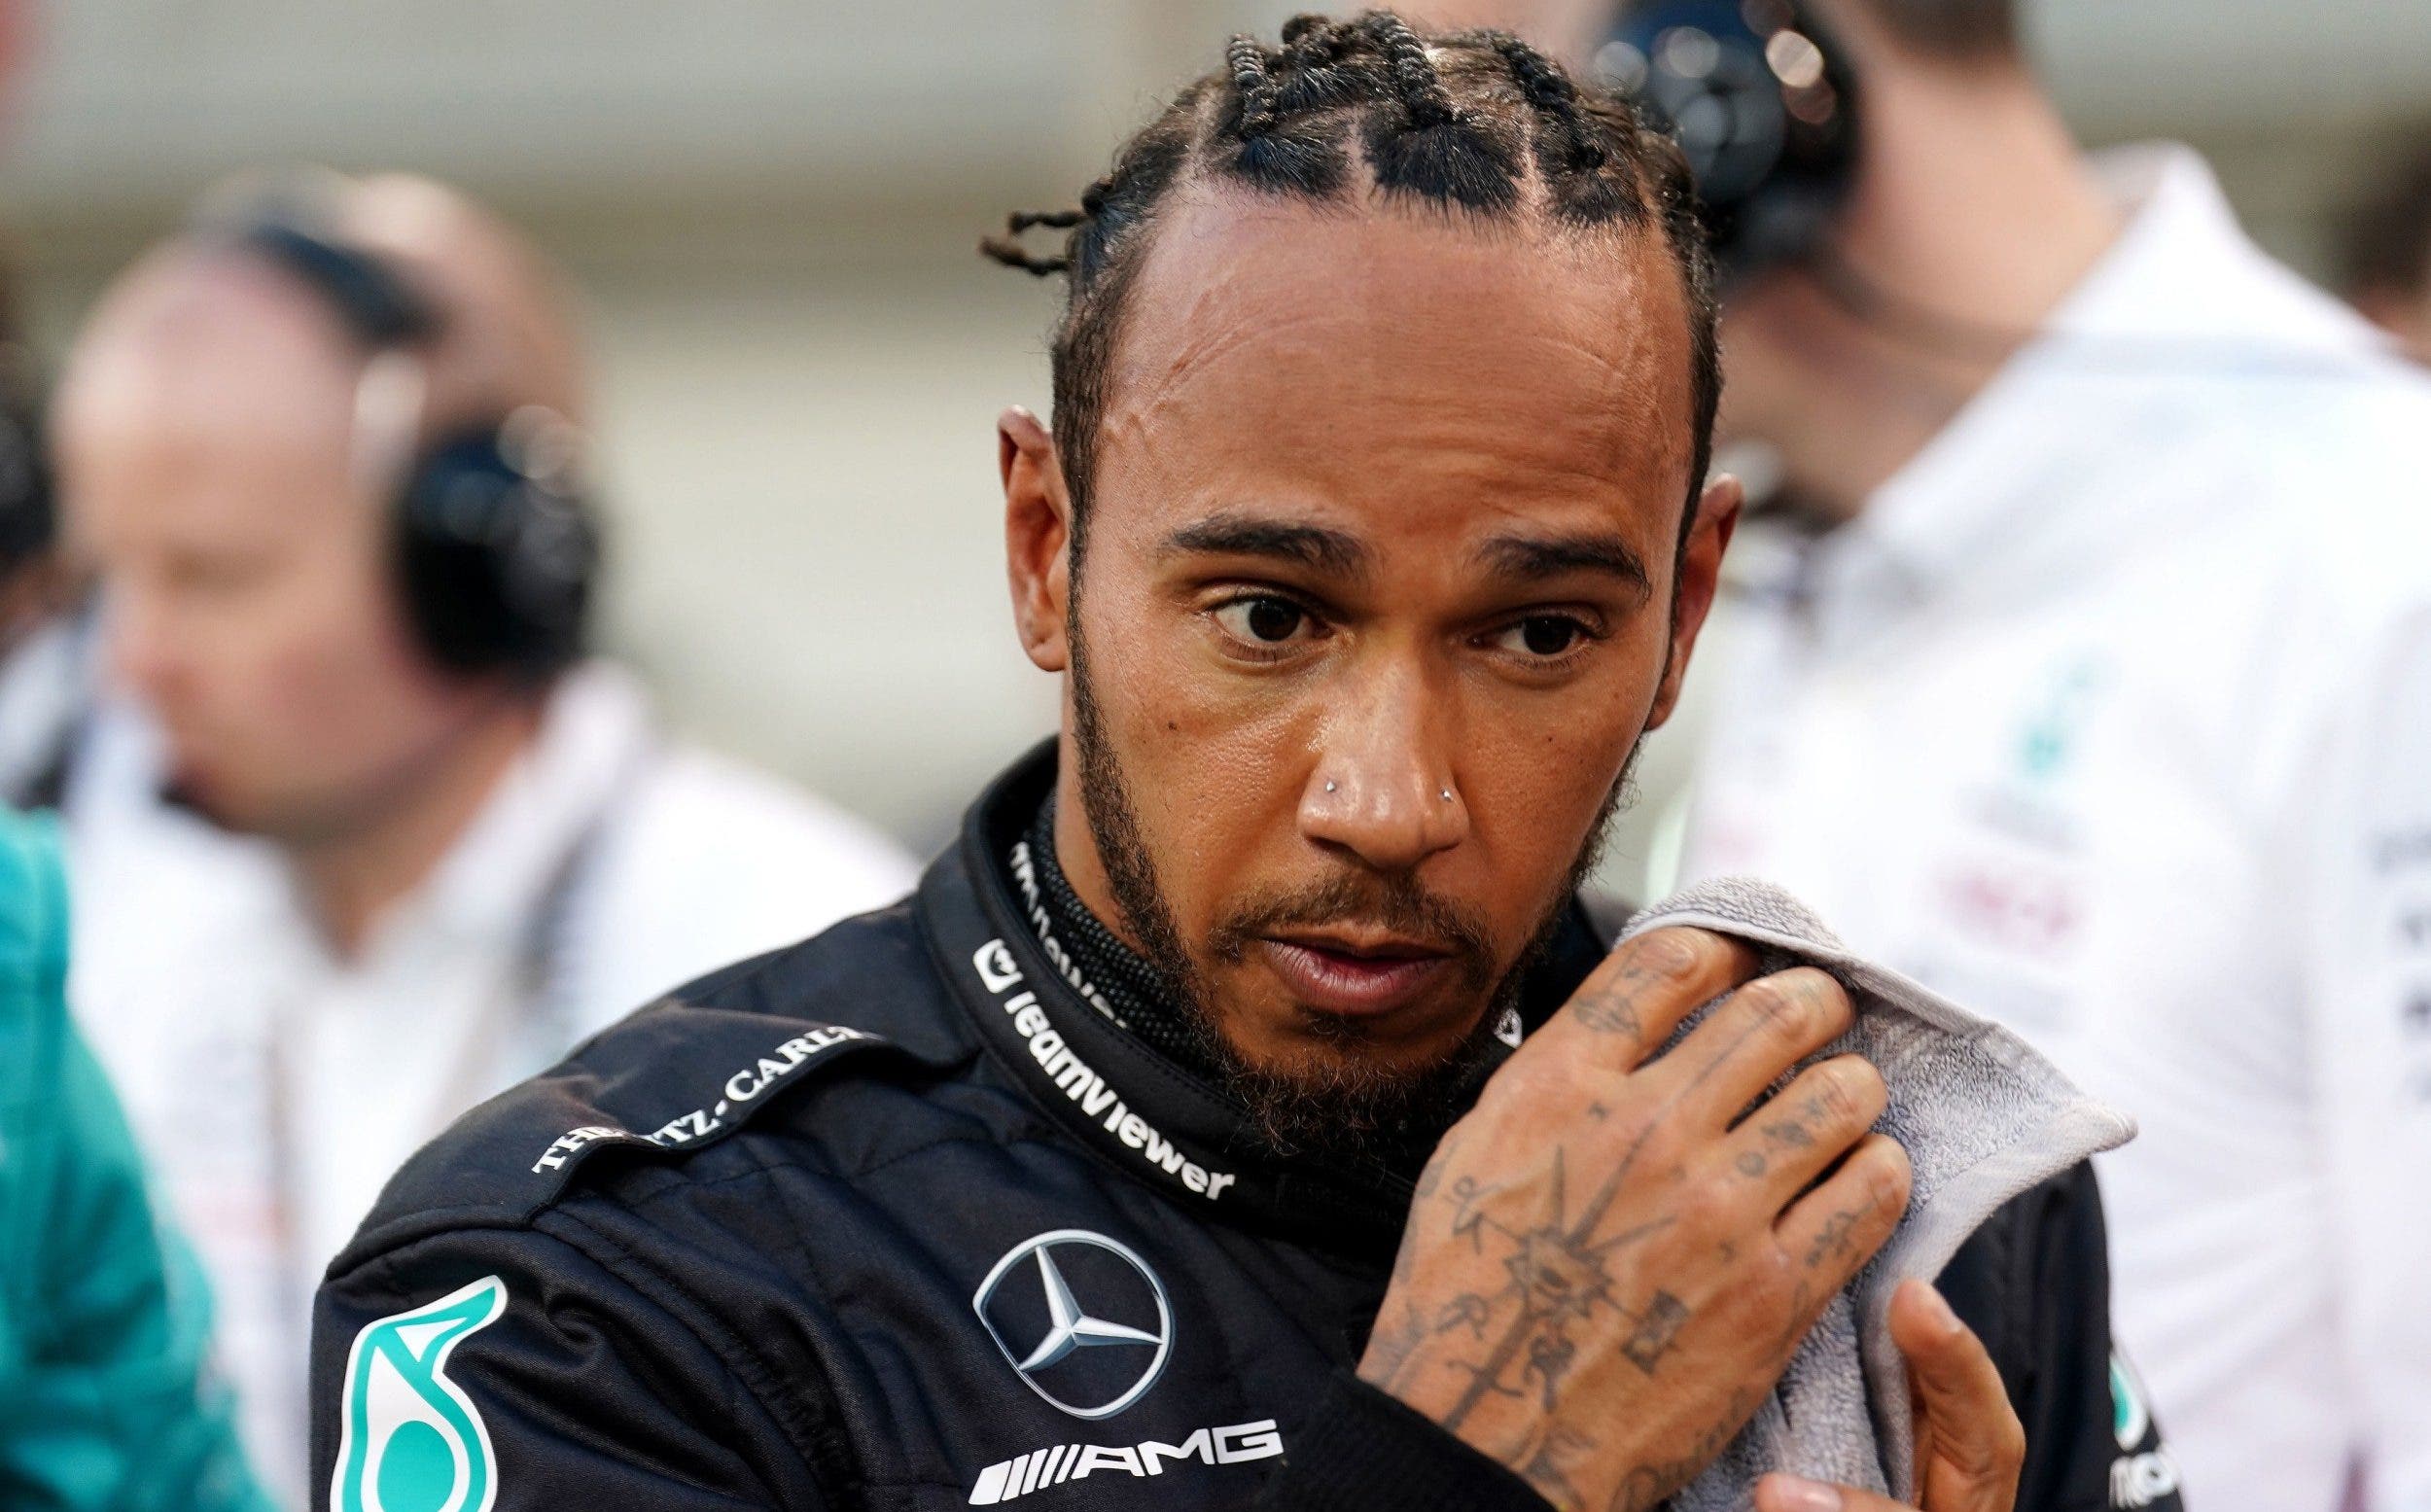 Hamilton's secret clause in his contract extension with Mercedes F1
	

